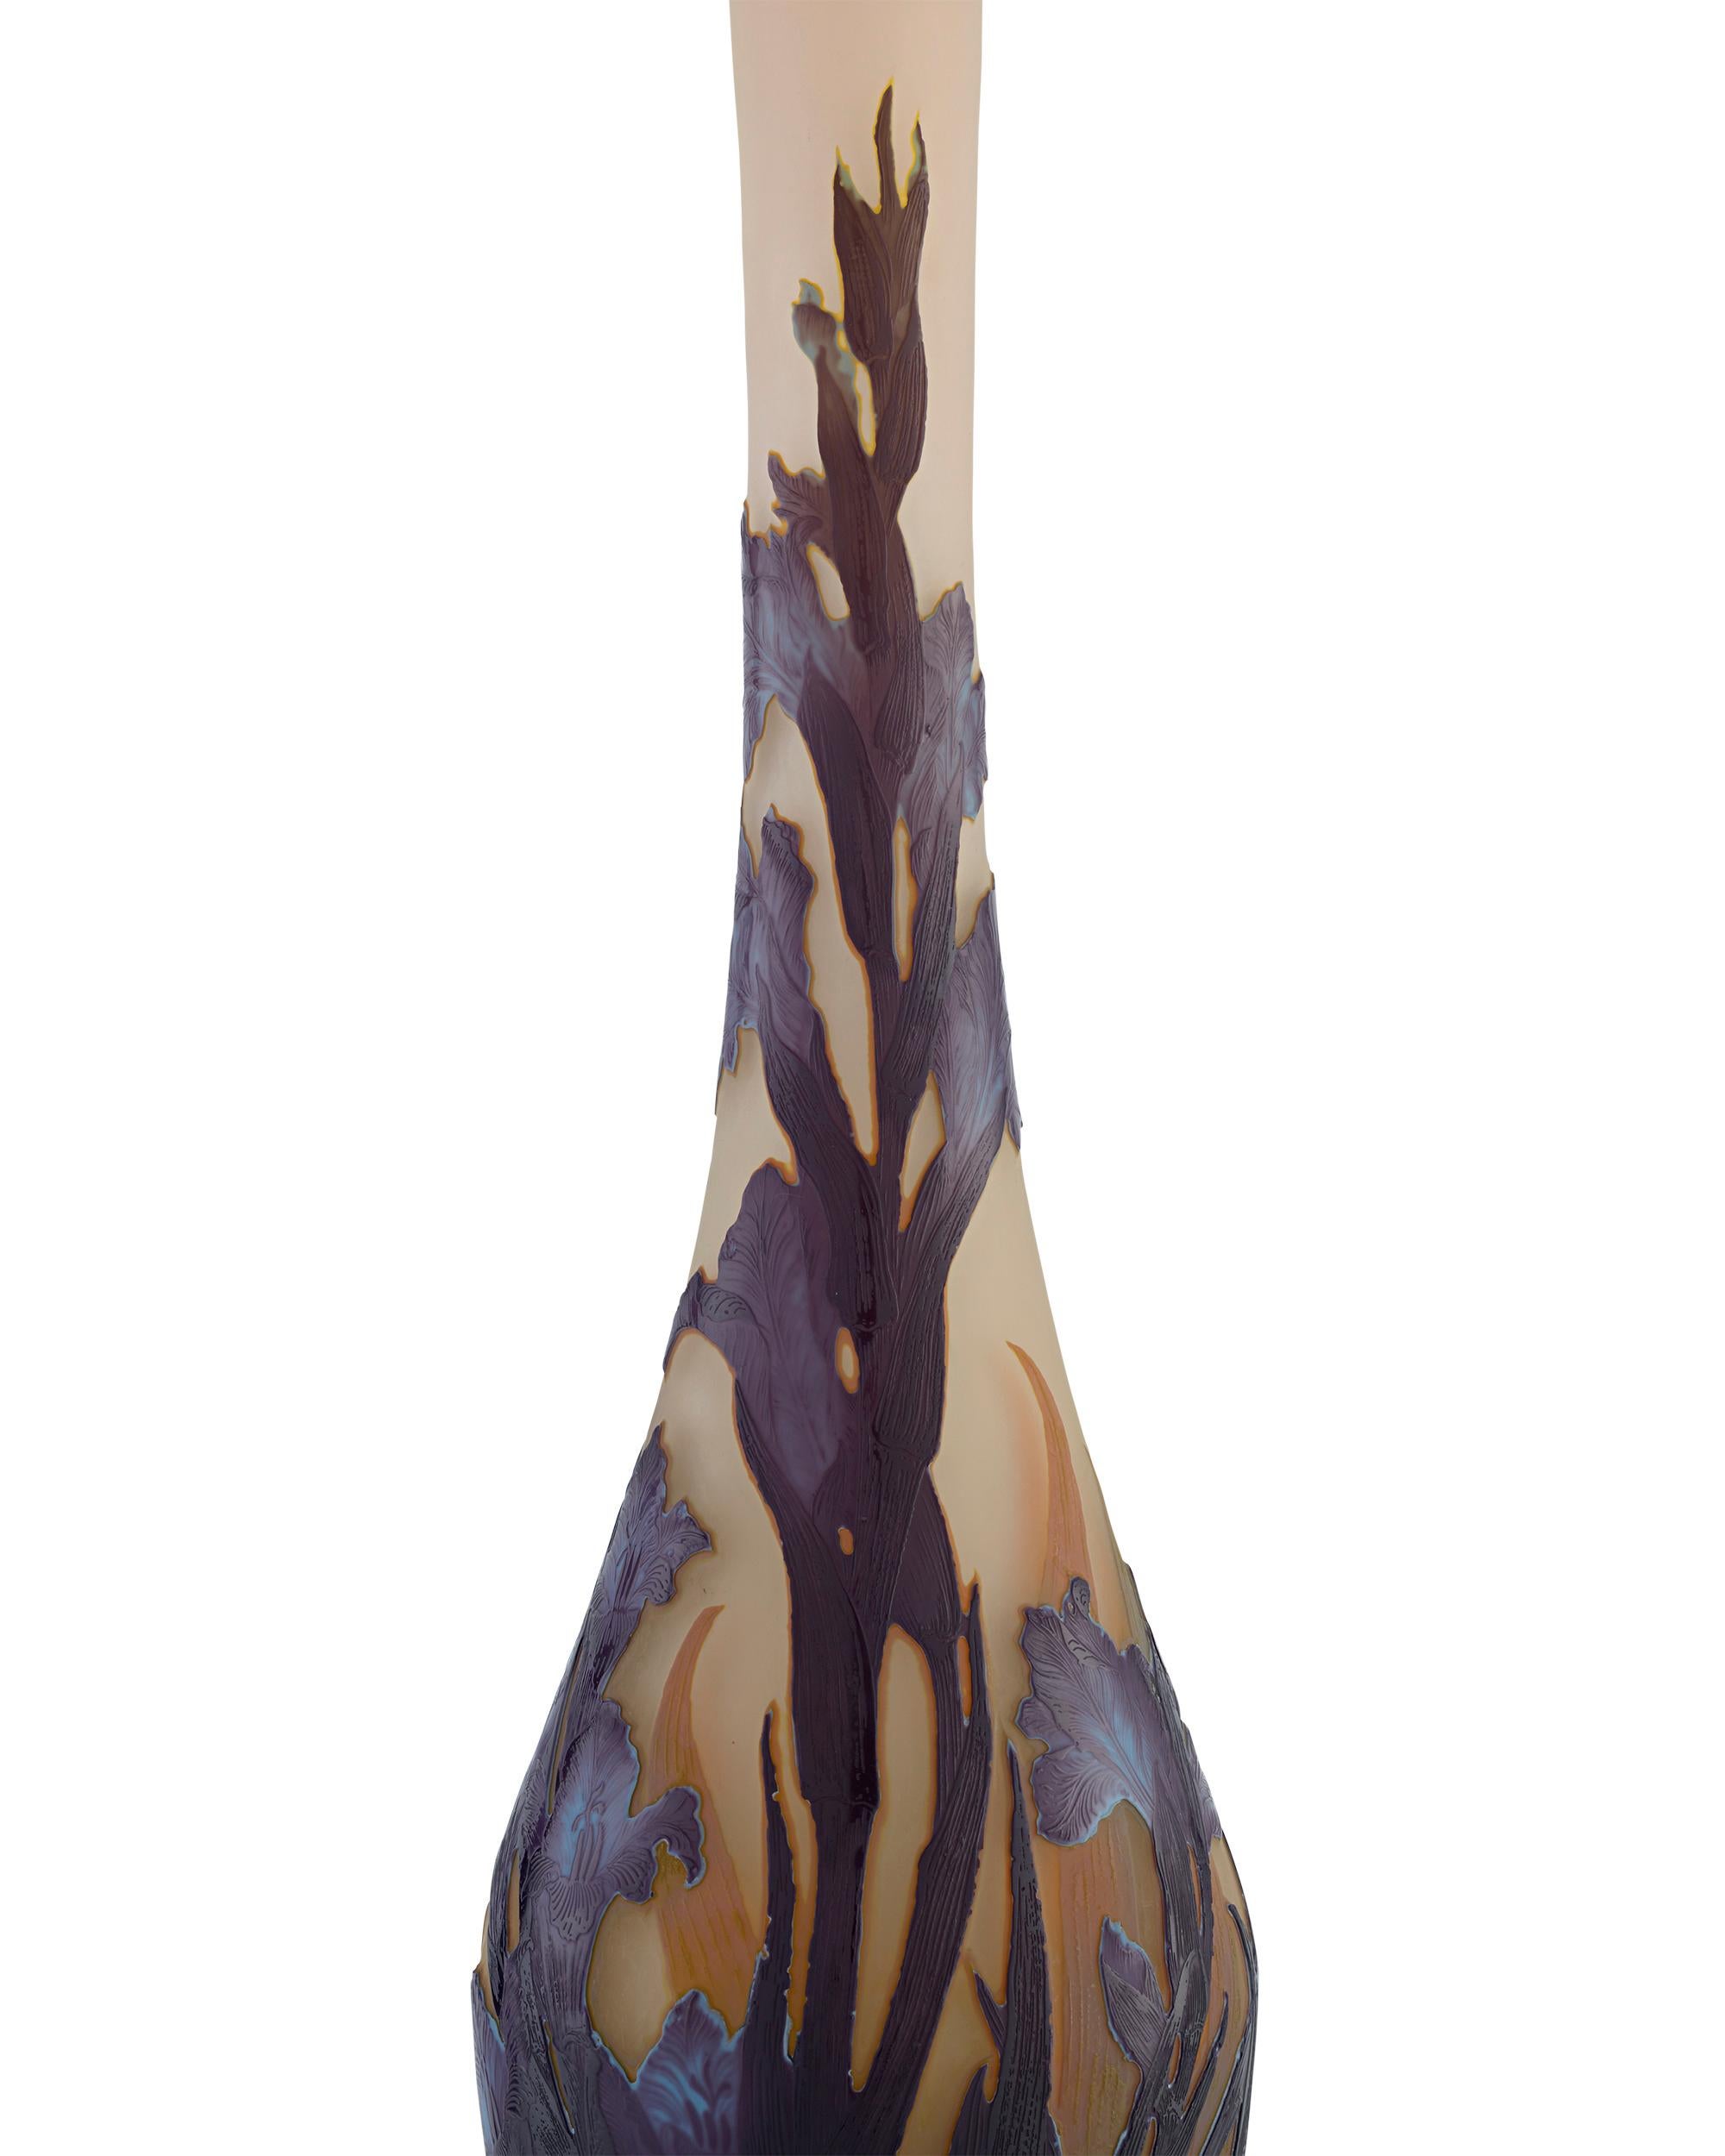 Exceptional in both size and artistry, this cameo art glass vase is the work of the famed Art Nouveau master Émile Gallé, one of the most highly regarded names in French glassmaking. The artist's love of nature is evident in the detailed rendition